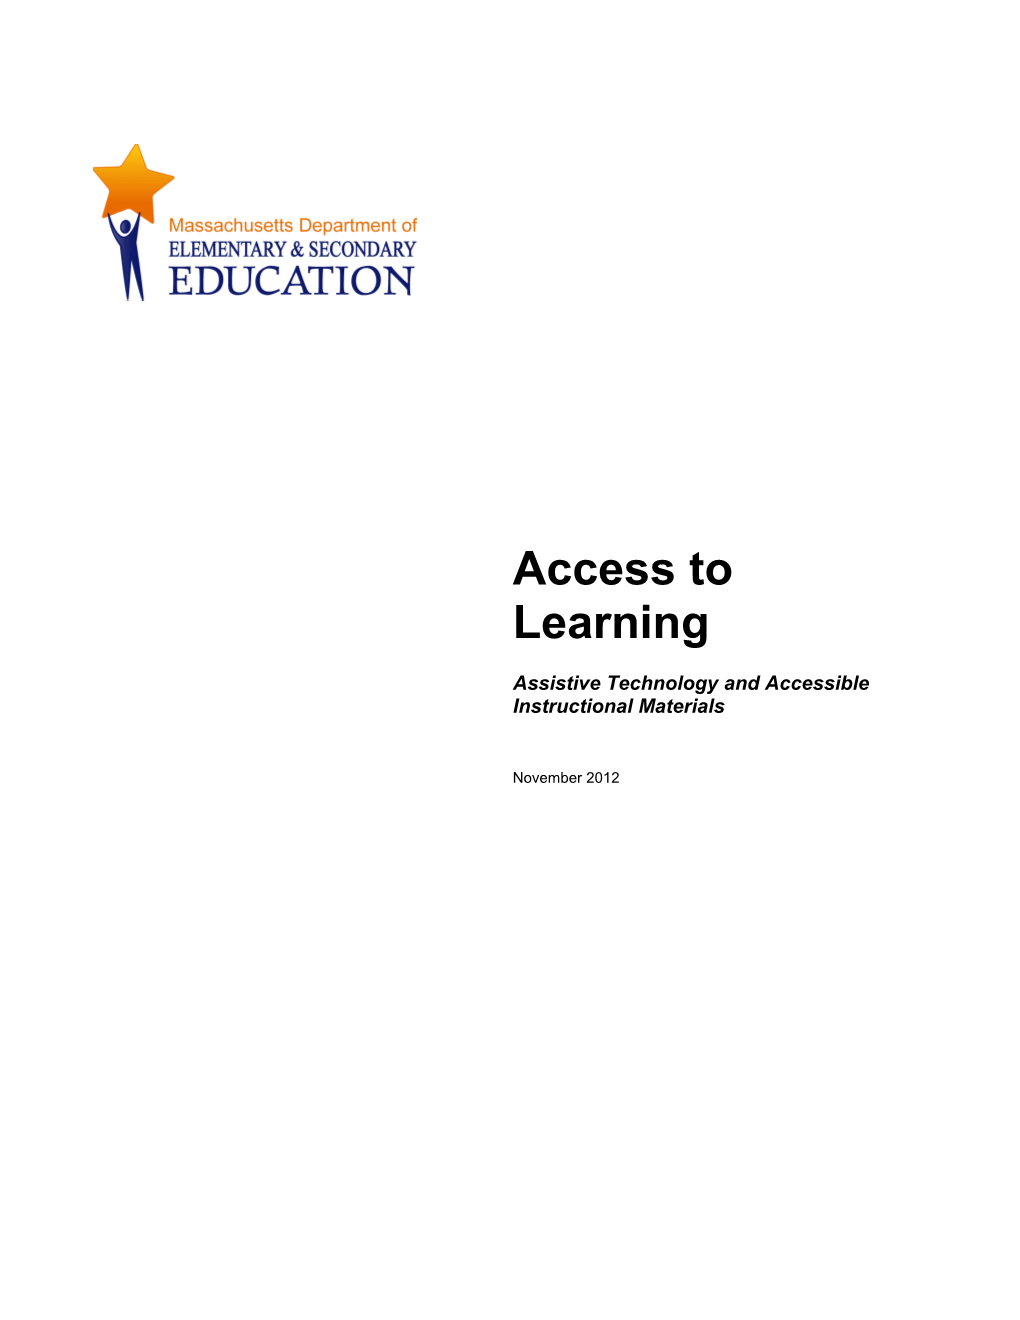 Access to Learning - Assistive Technology and Accessible Instructional Materials